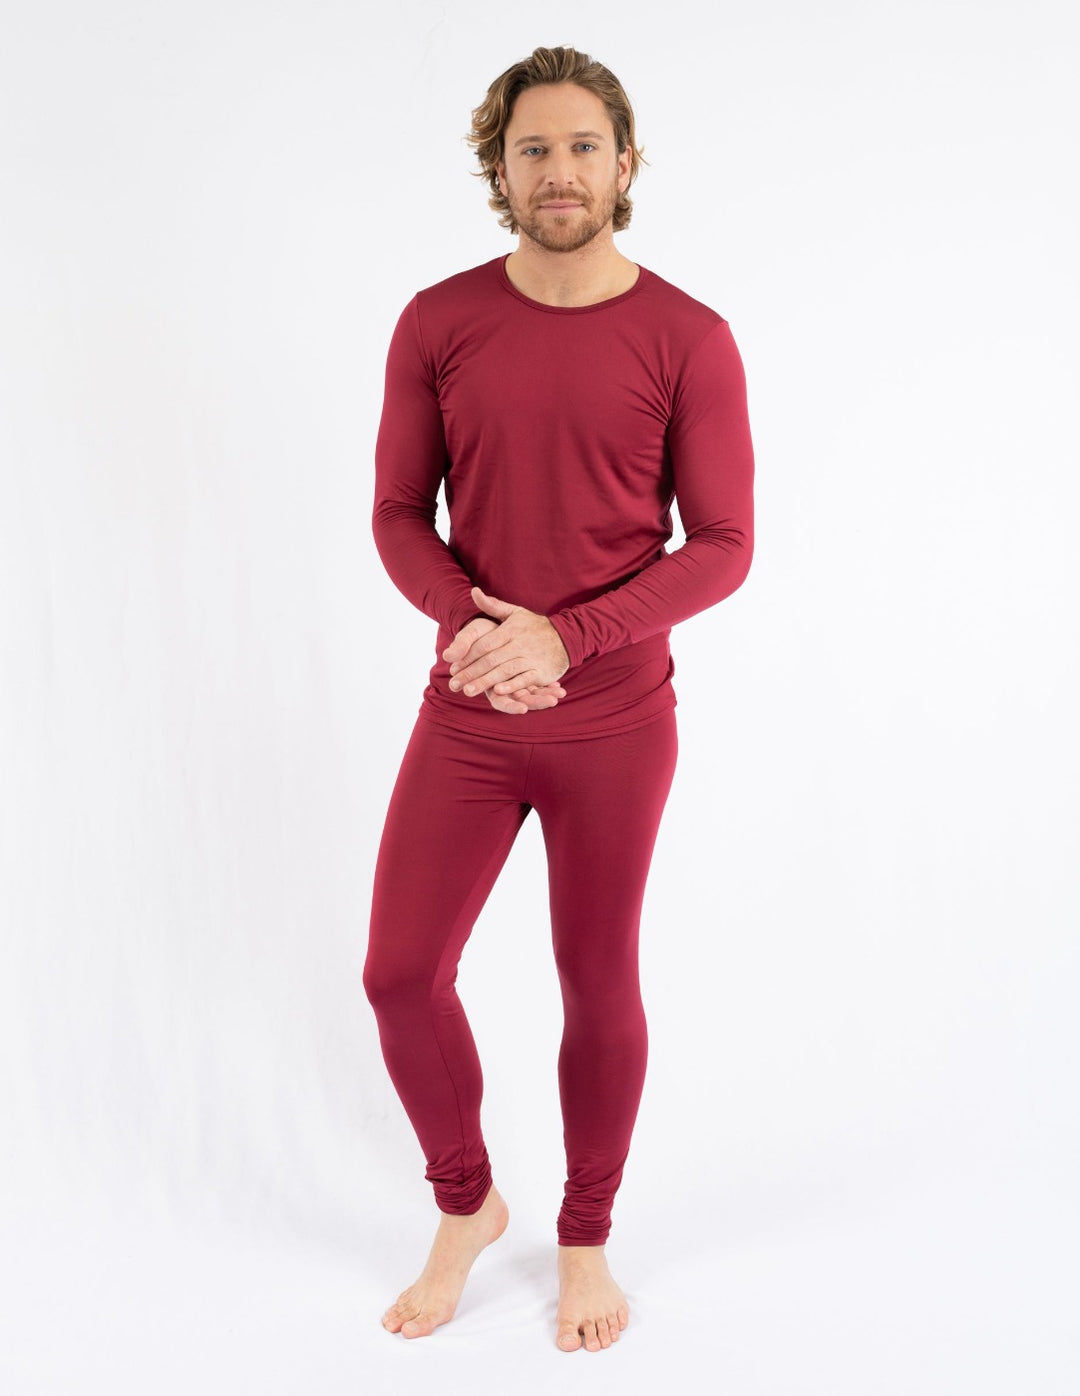 Shop Thermal Clothes For Winter Men online